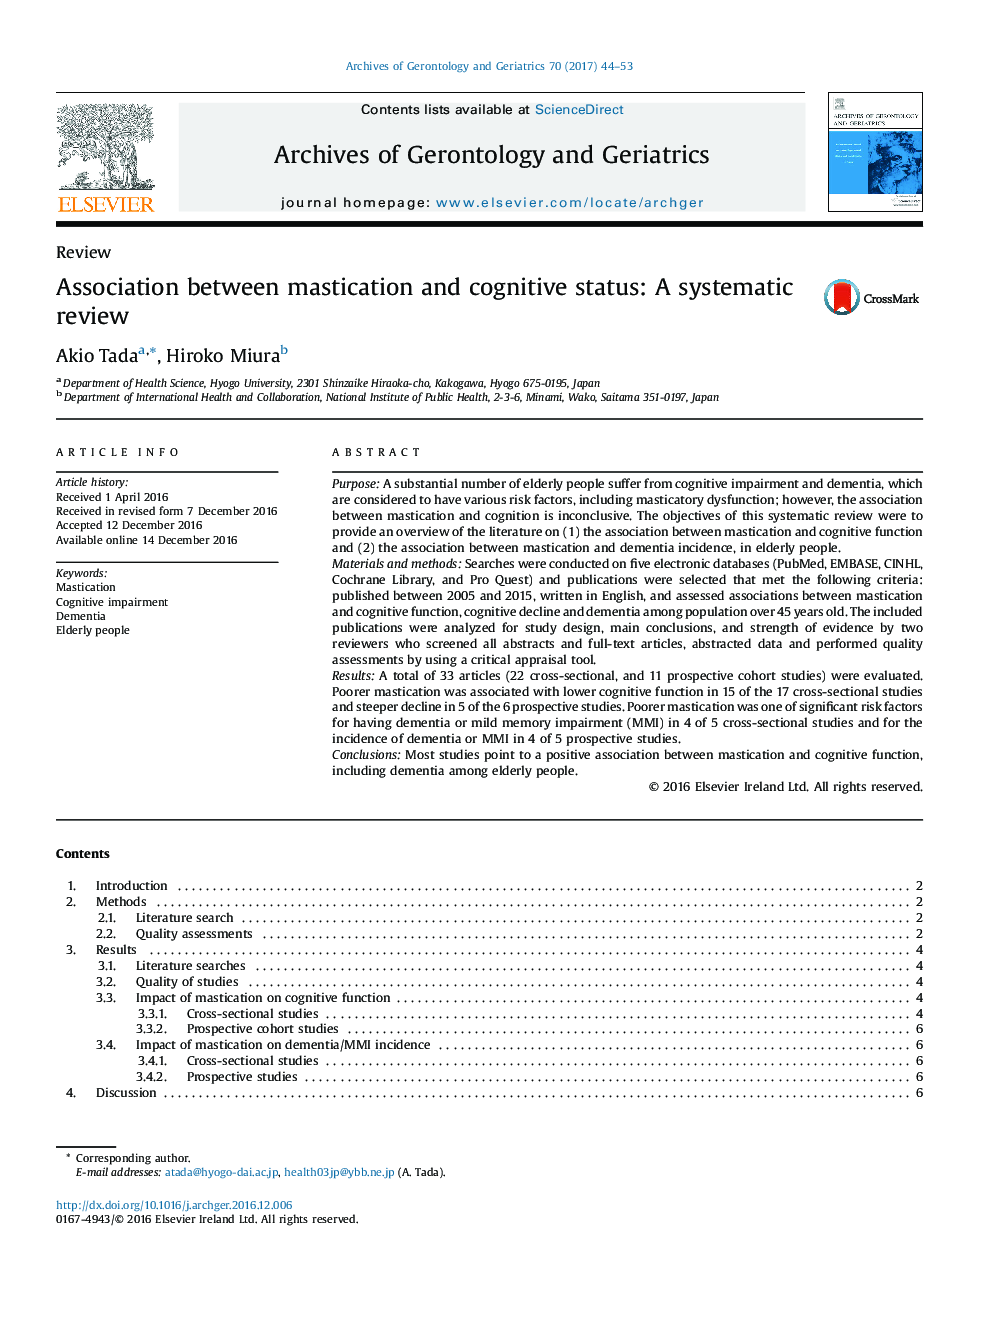 Association between mastication and cognitive status: A systematic review